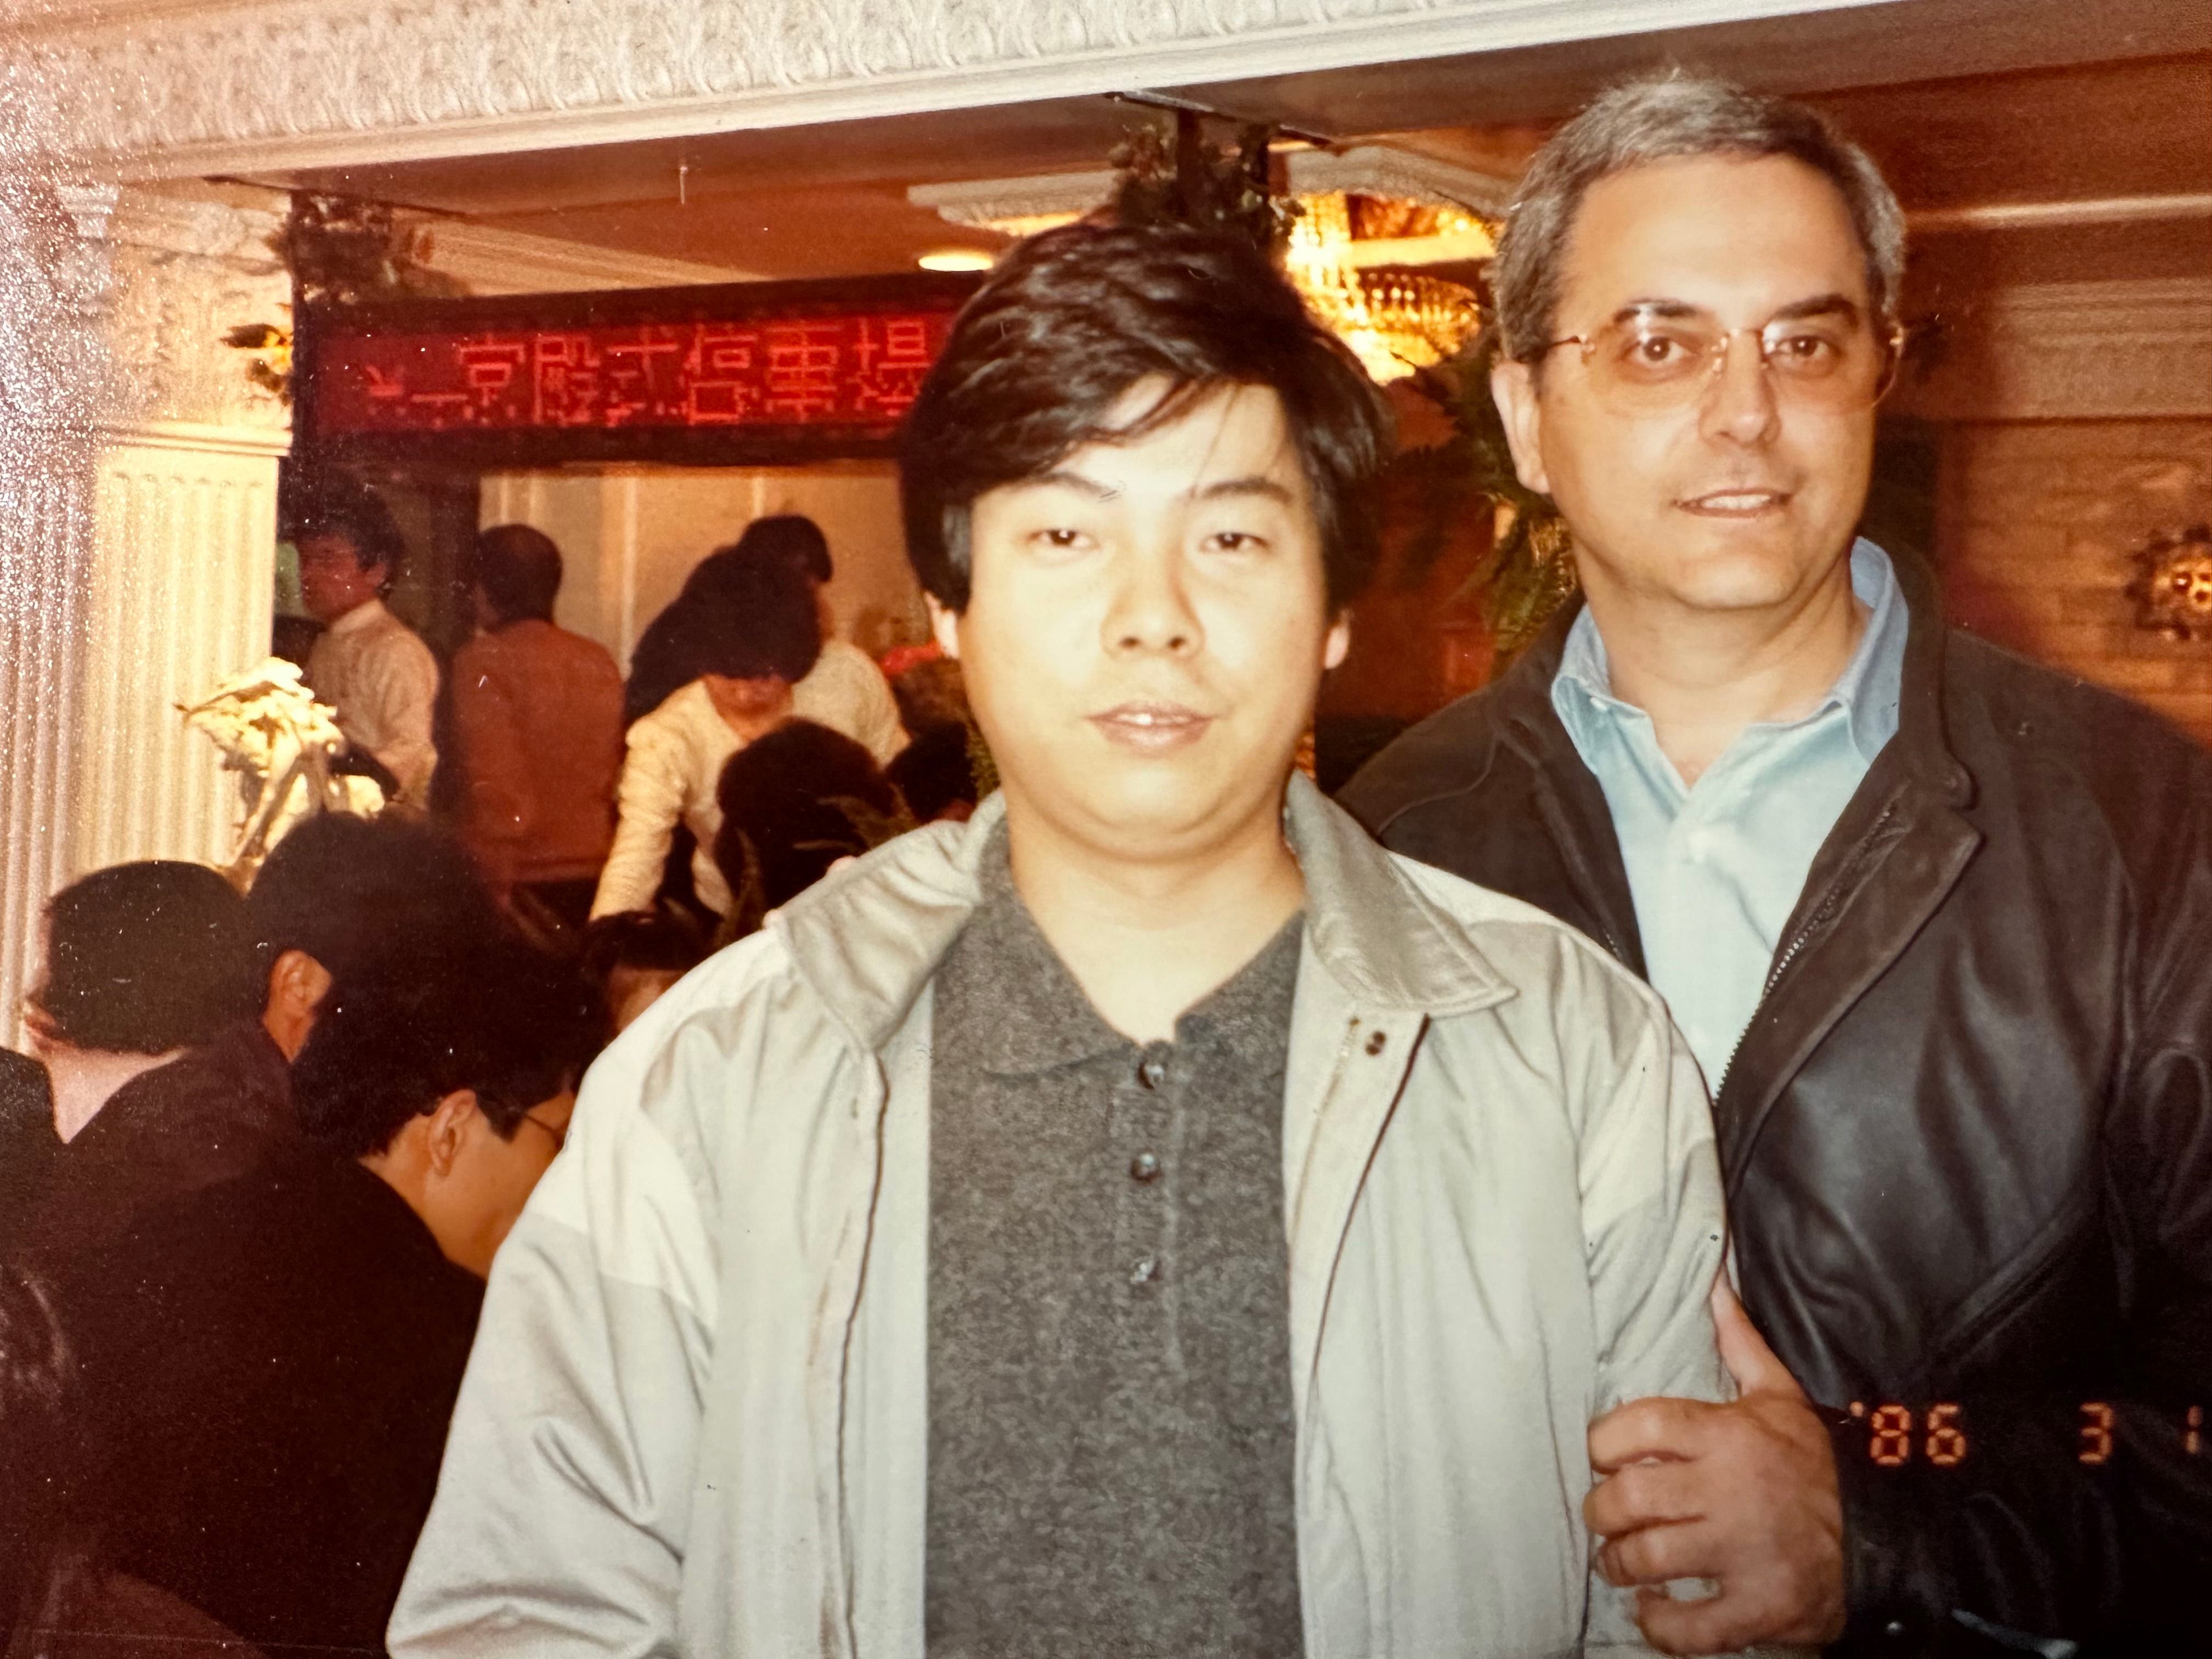 Allan with one of the sourcing agents, 1986